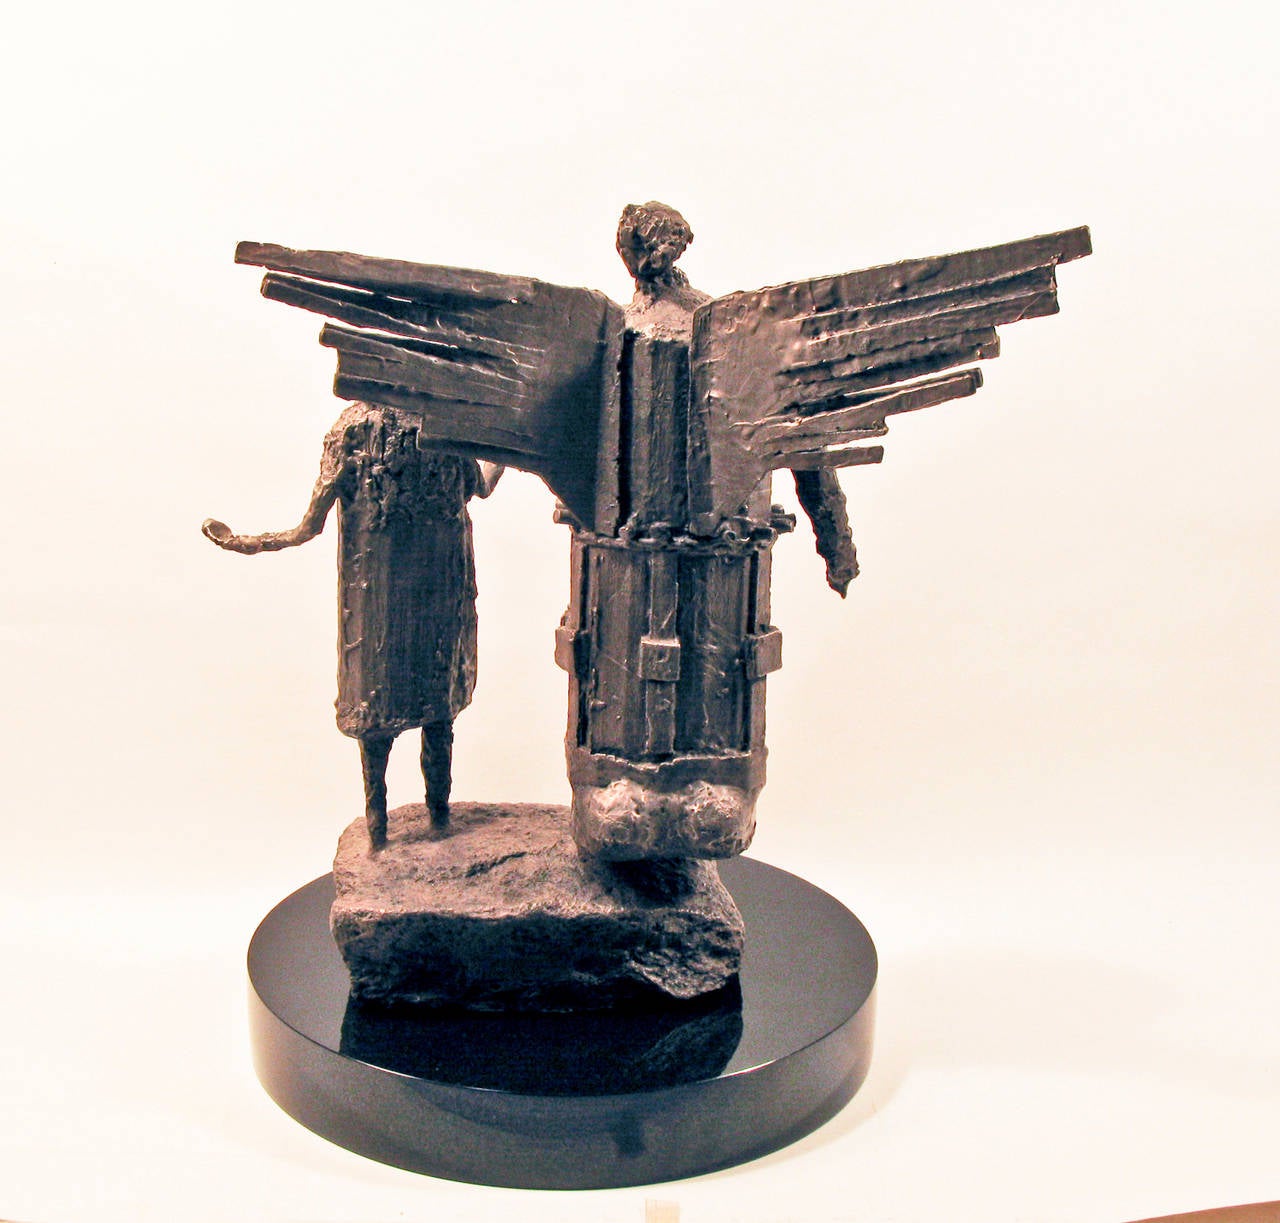 My Angel (Mi Angel), Eduardo Oropeza, bronze, sculpture, antique silver, patina

Sculptor, painter, printmaker, & photographer, Eduardo Oropeza remains a commanding presence in contemporary art. He applied a high level of devotion and integrity to